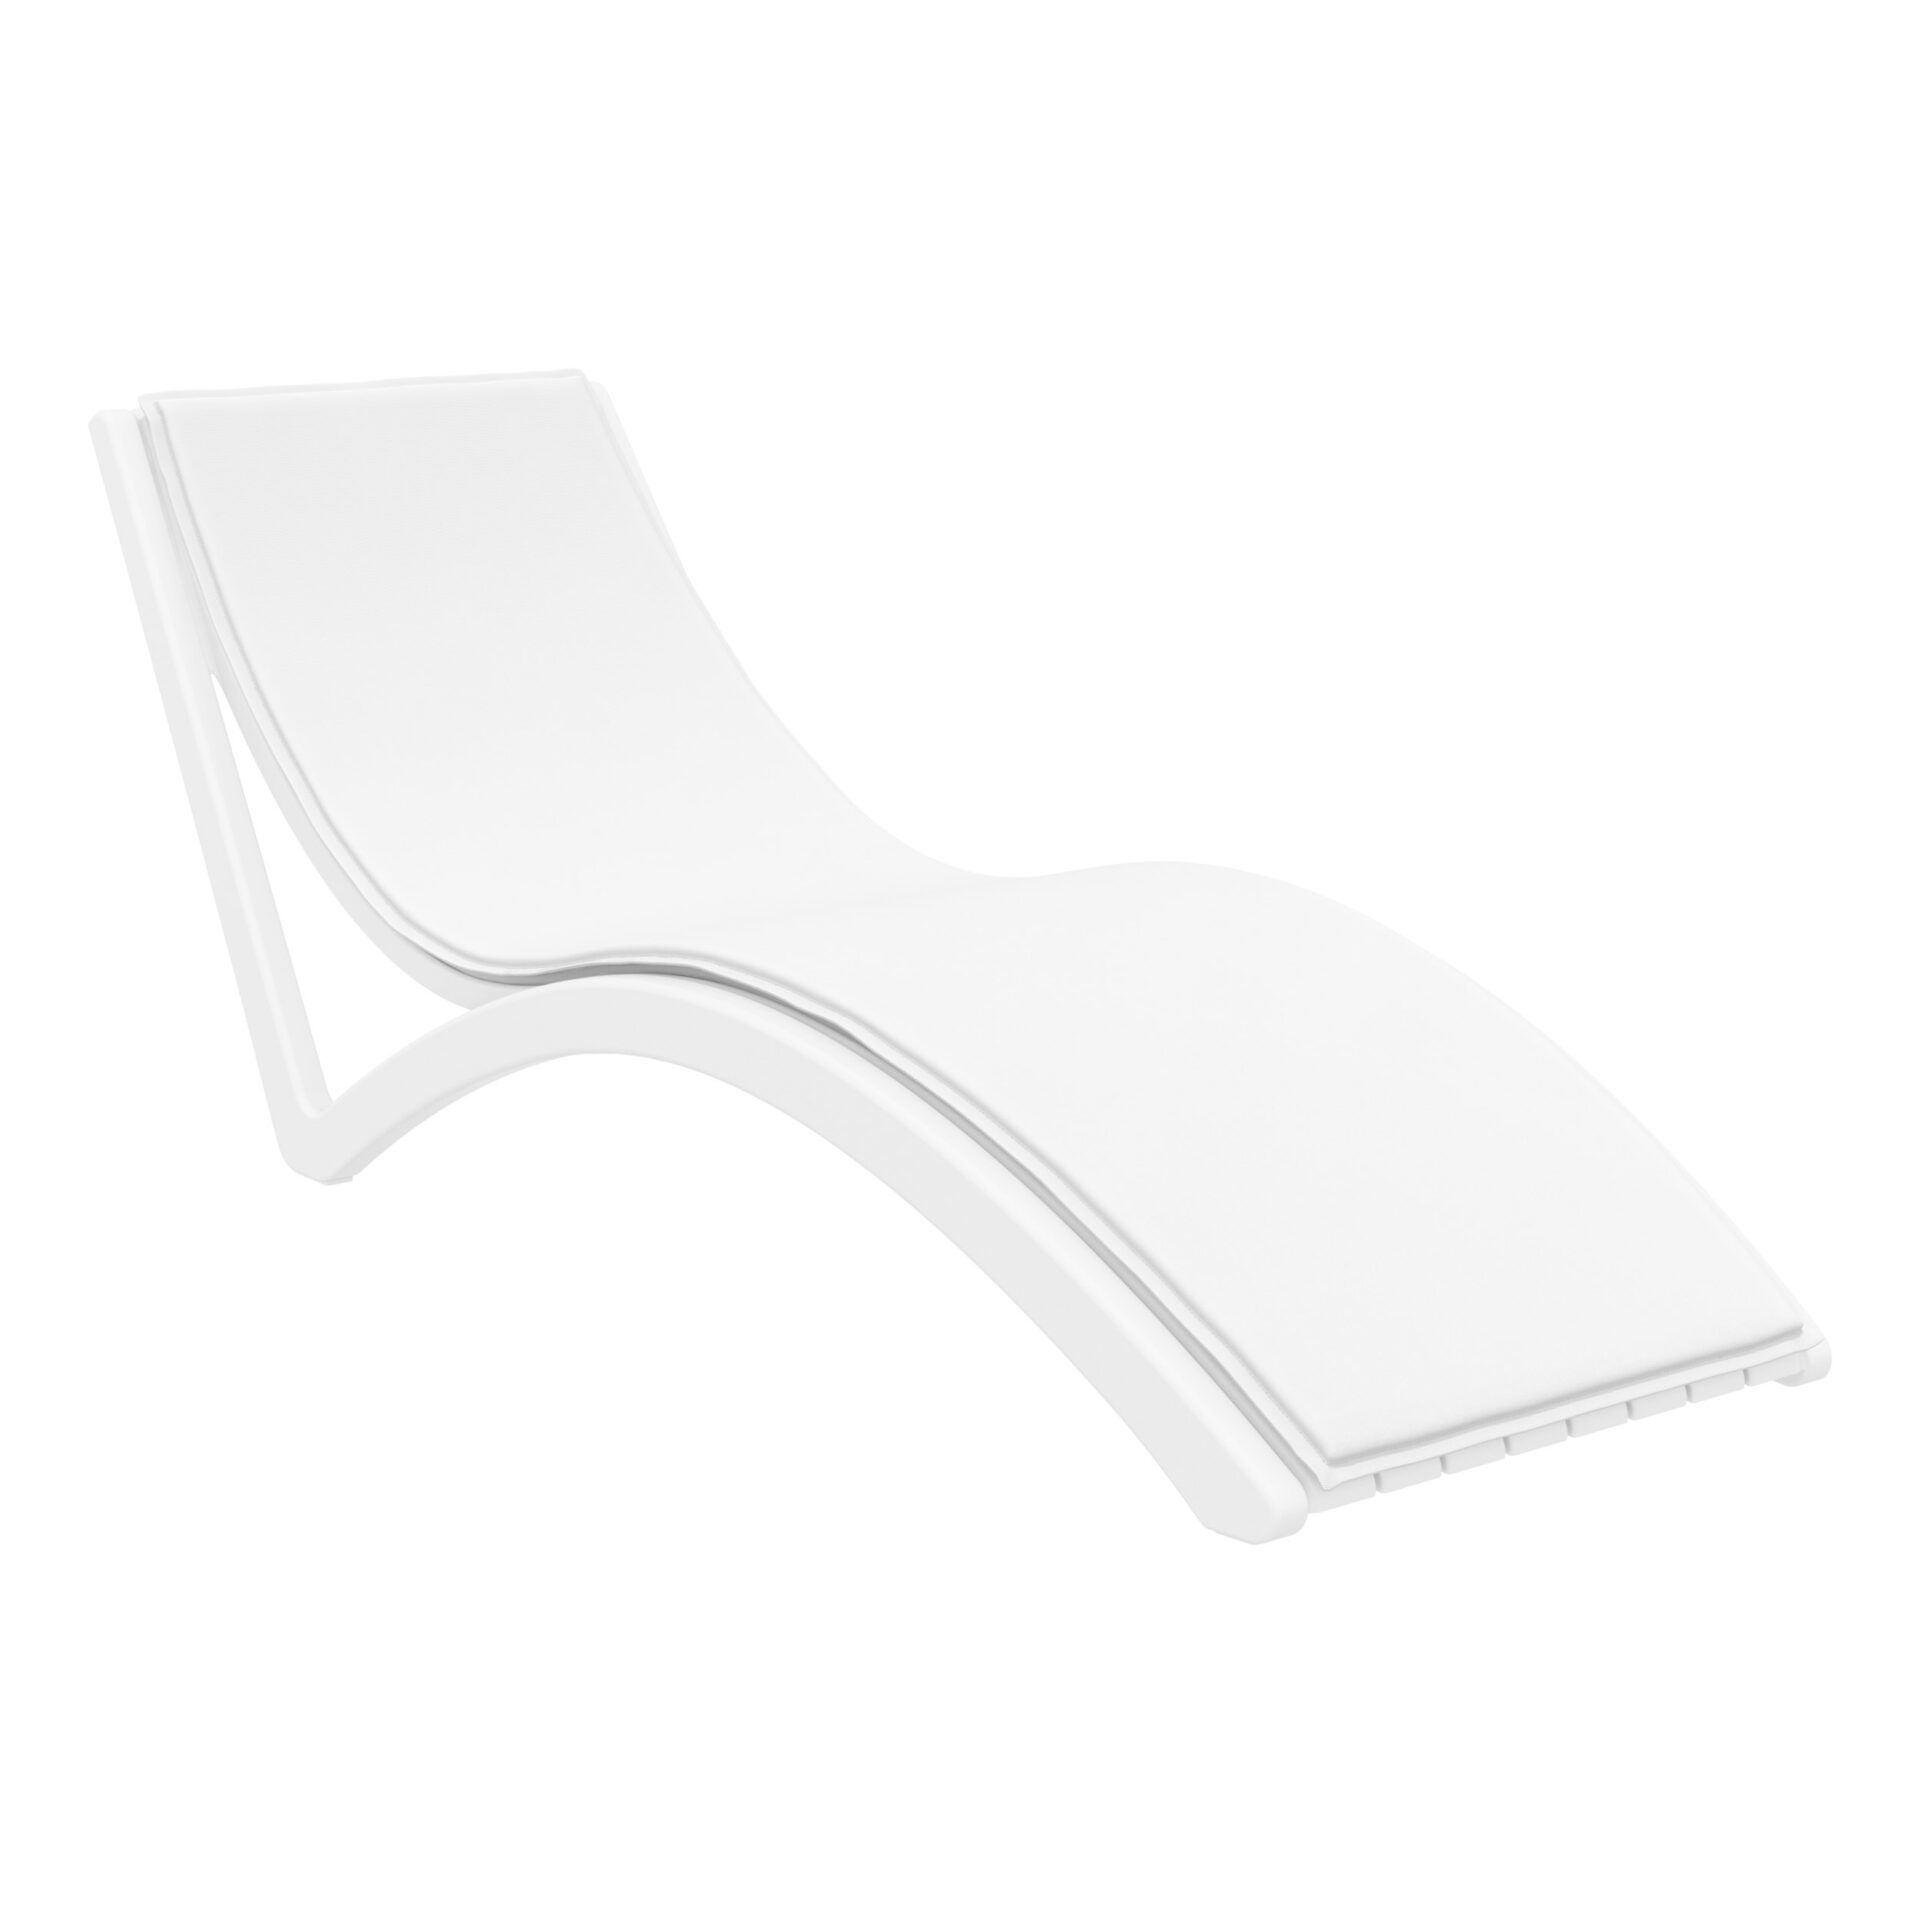 outdoor polypropylene slim sunlounger cushion white white front side